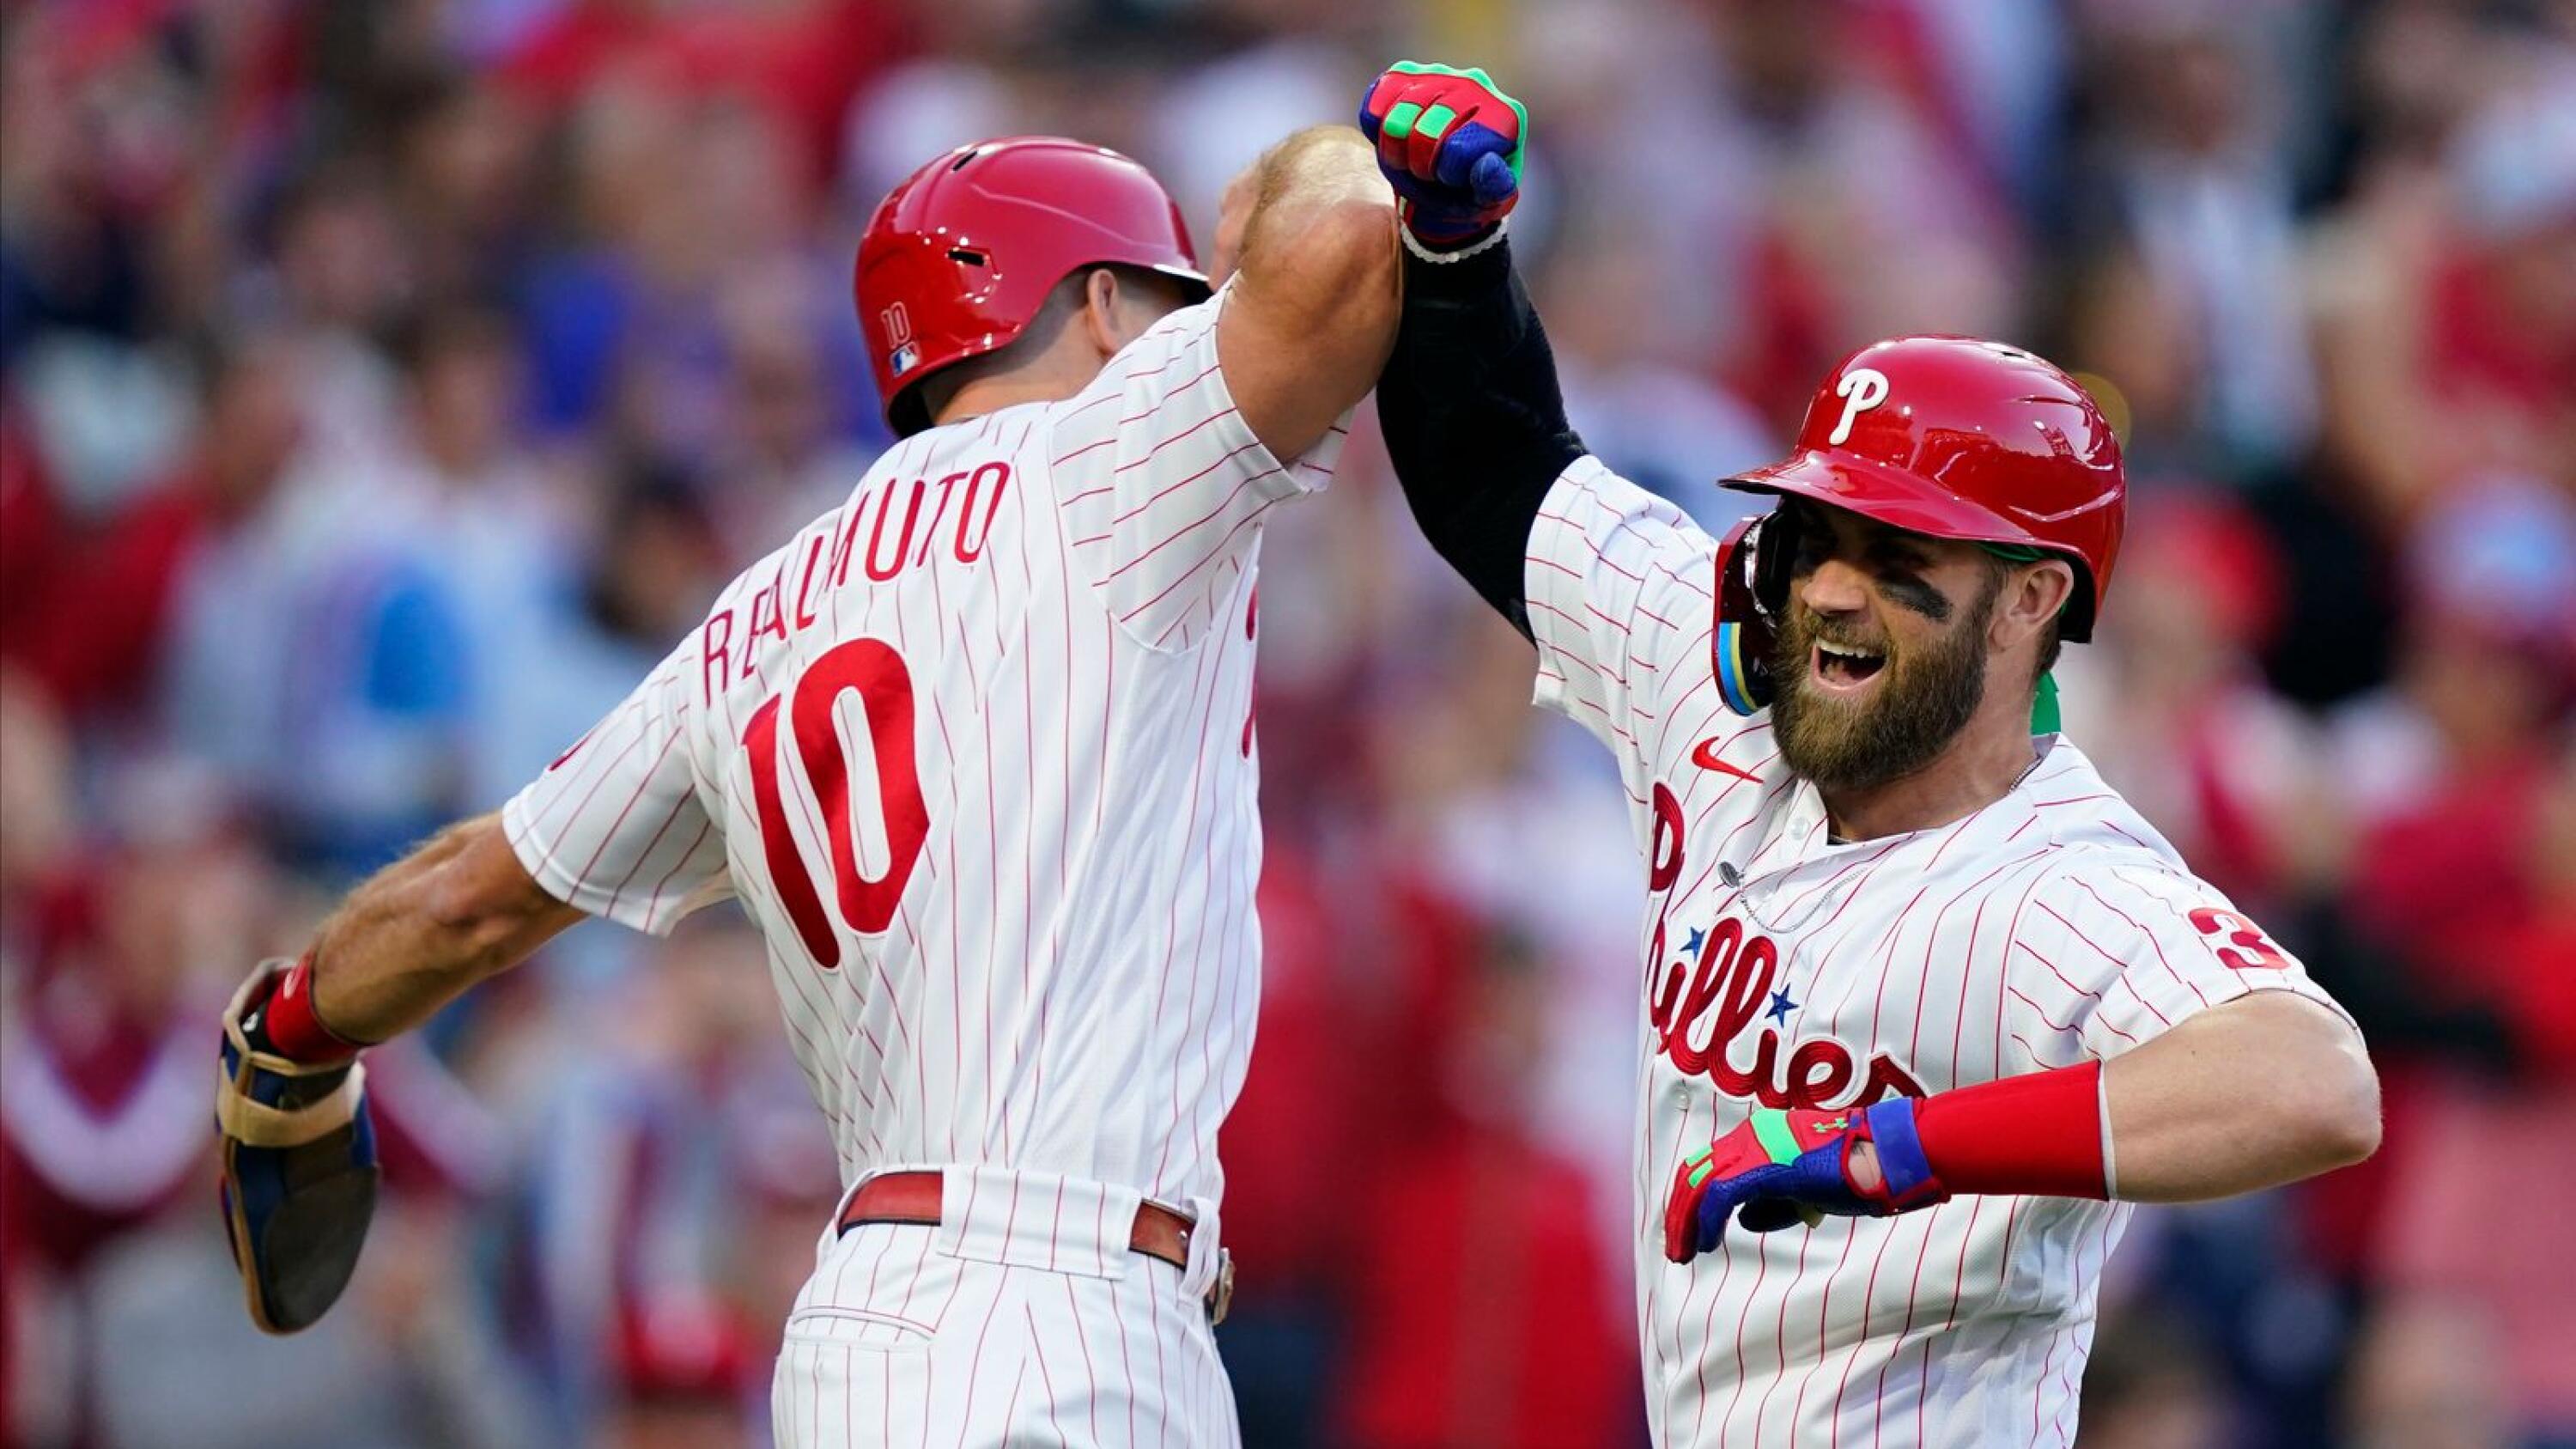 Phillies lose Bryce Harper, J.T. Realmuto, and the game, 4-0, in